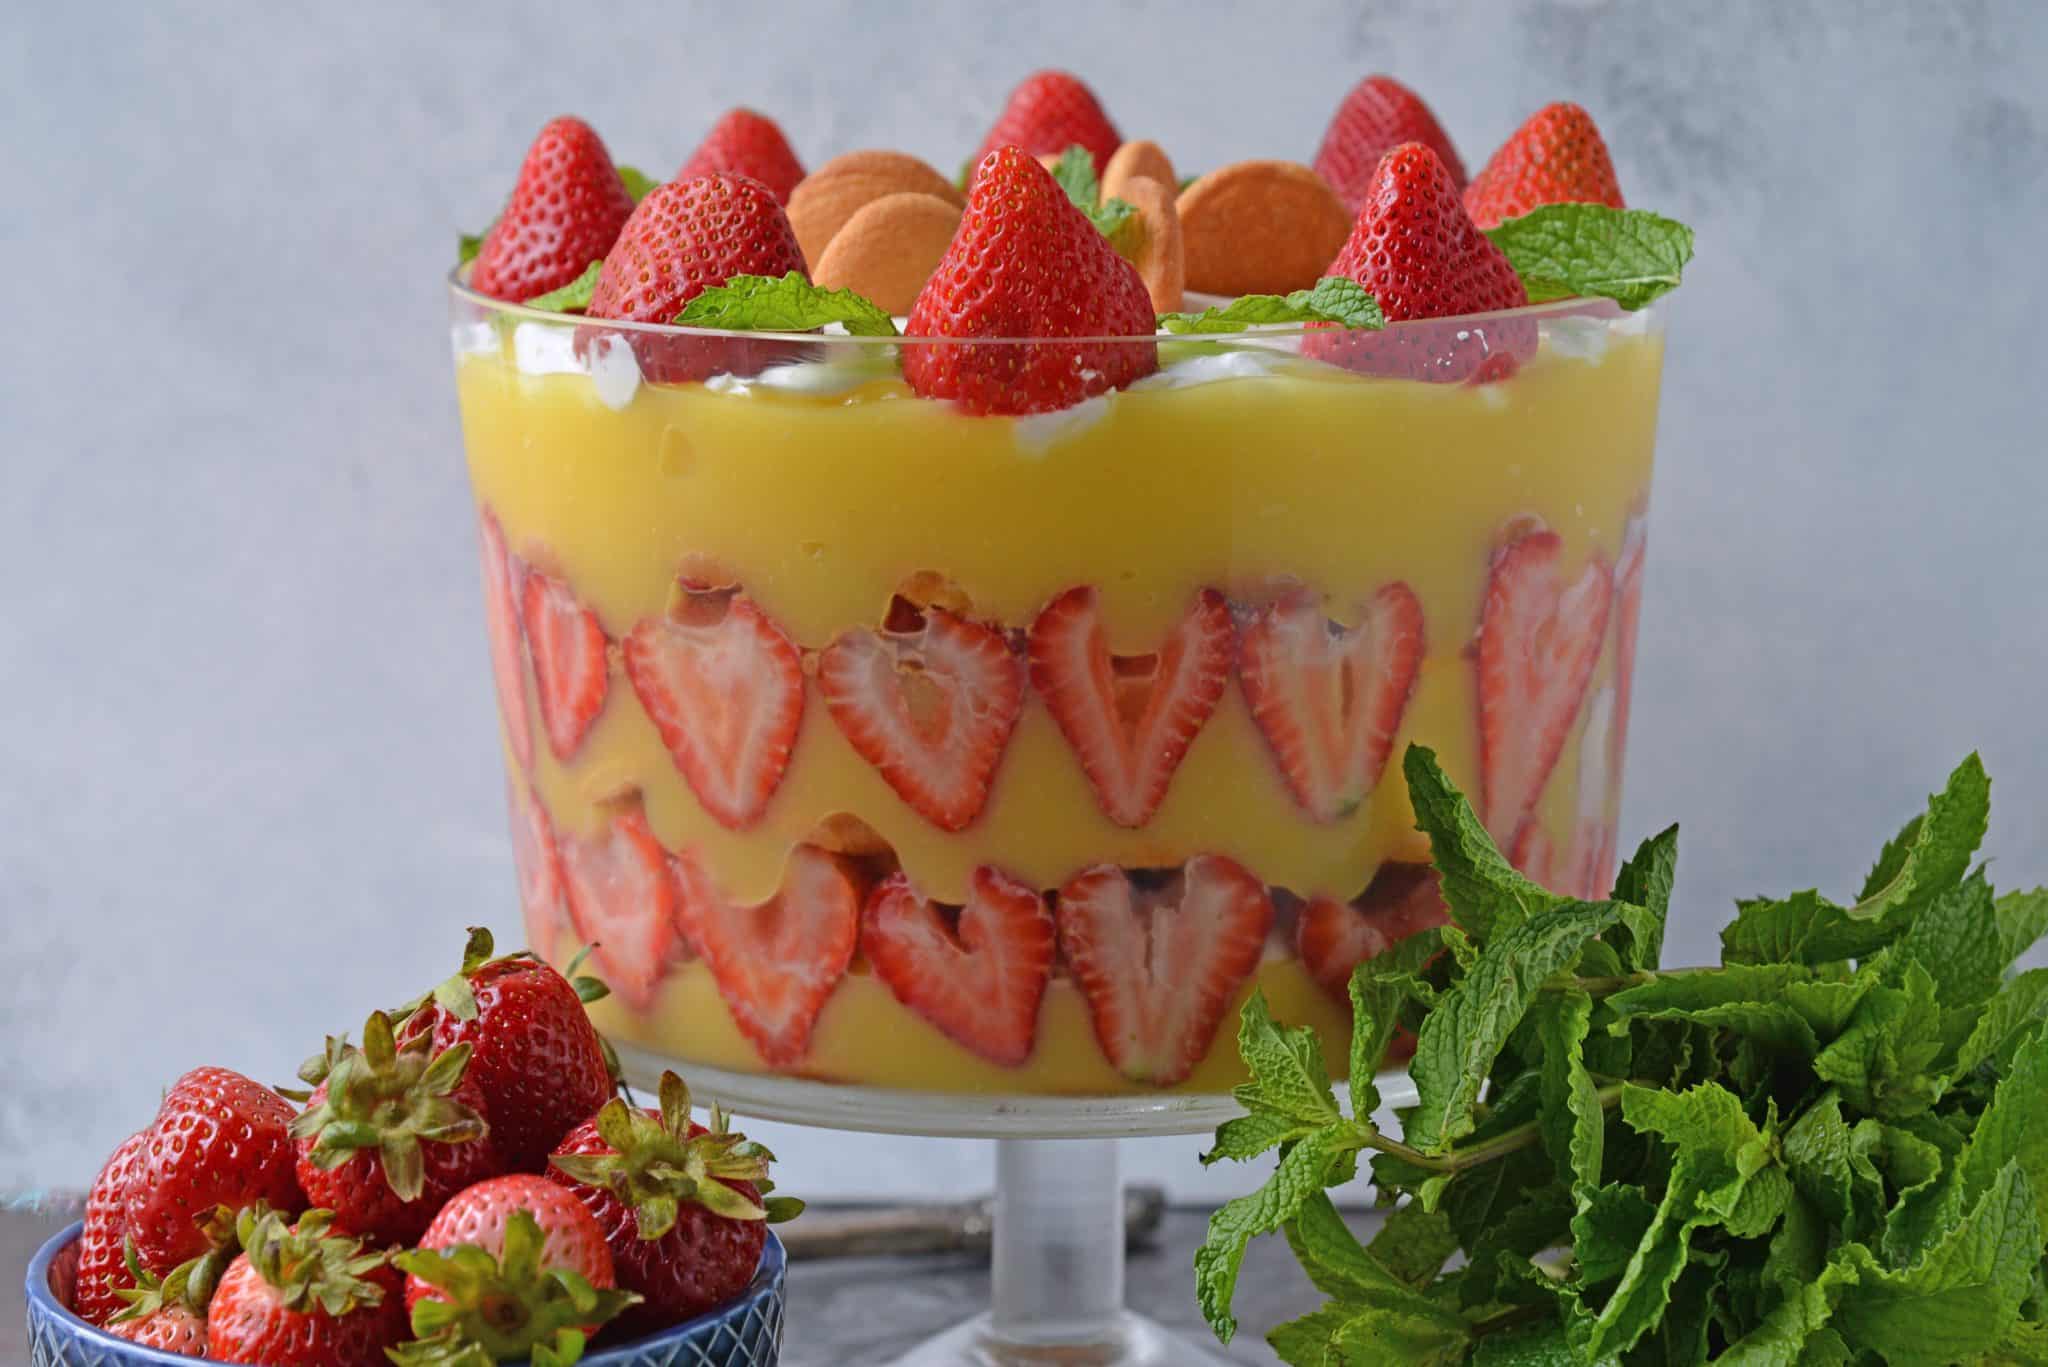 Strawberry Pudding Trifle dessert is just like classic banana pudding, but with strawberries. Layers of wafer, pudding, strawberry and cream cheese whipped cream make this easy dessert recipe a winner! #strawberrypuddingtrifle #trifledessert www.savoryexperiments.com